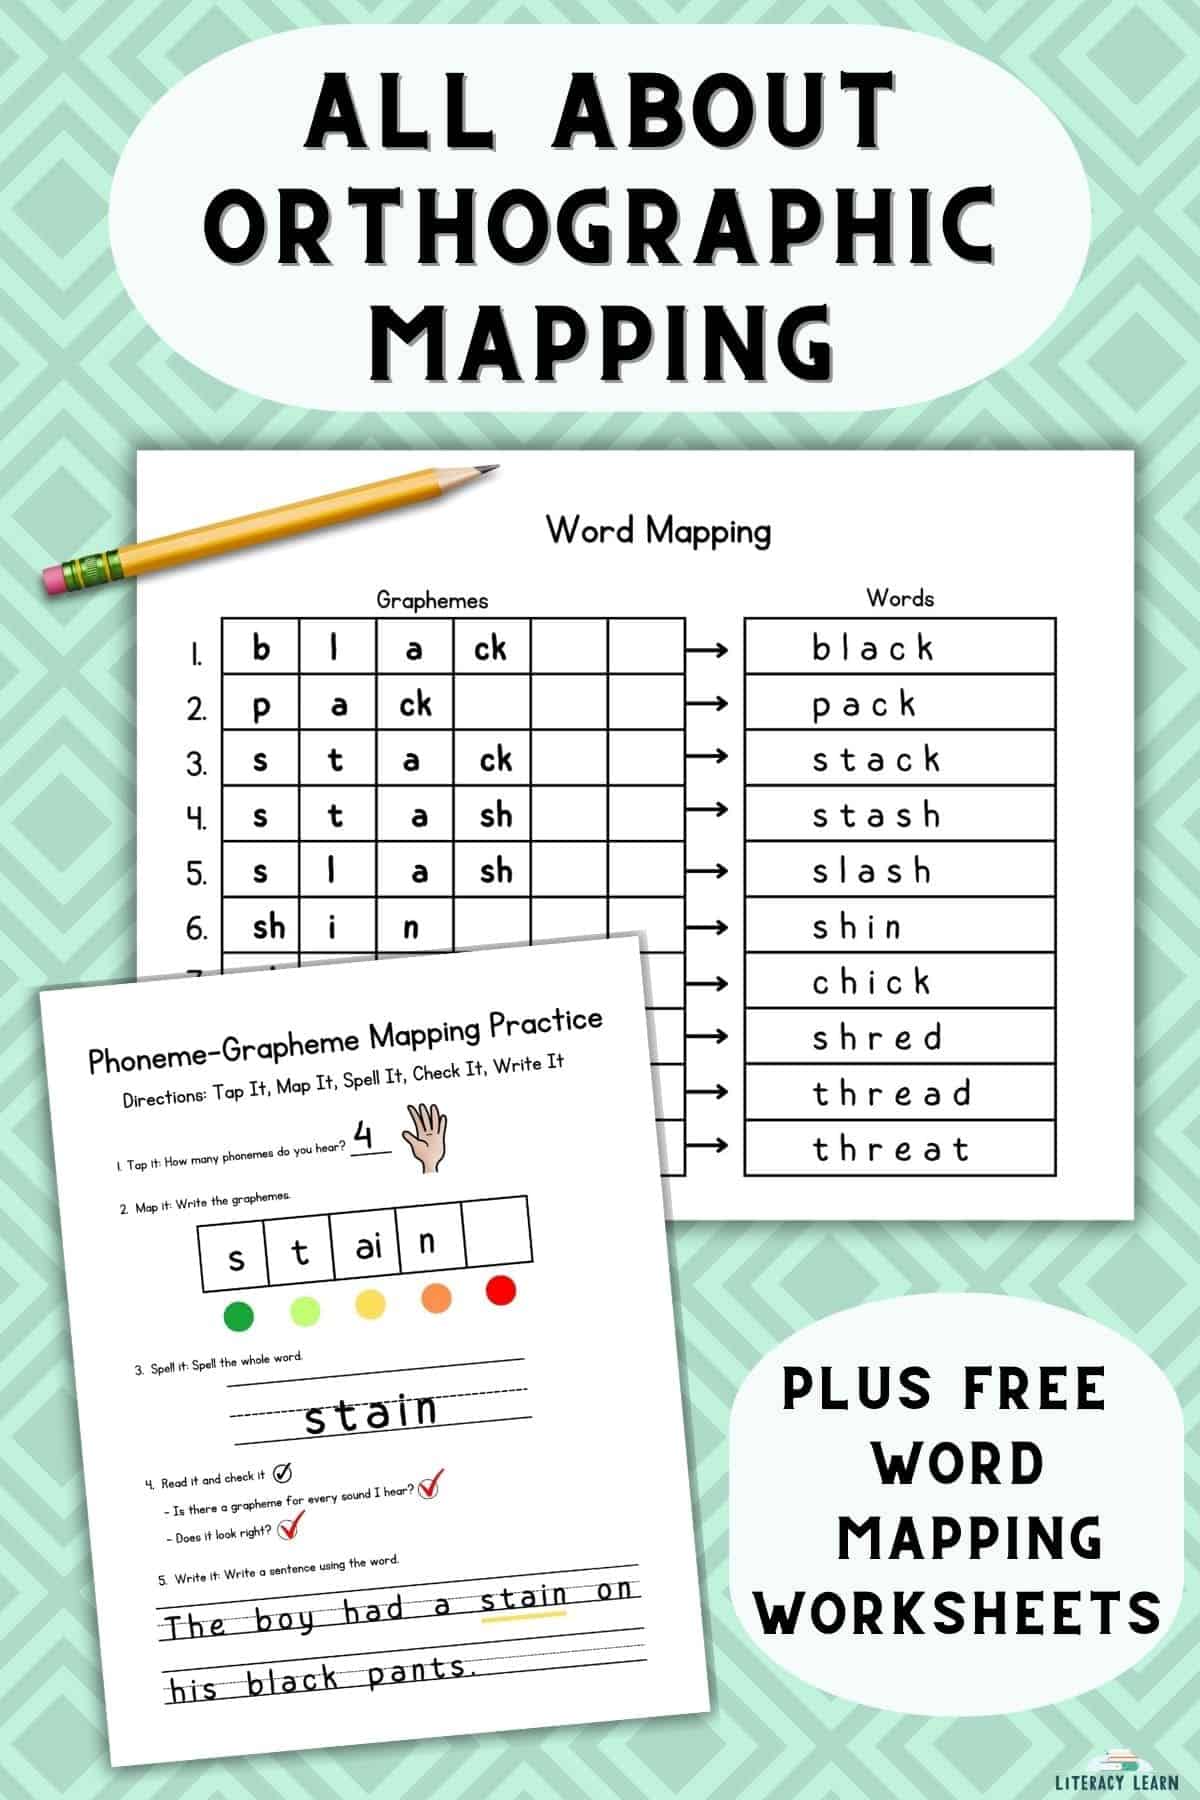 Graphic with title "All About Orthographic Mapping" with two free worksheets and a pencil on green background.